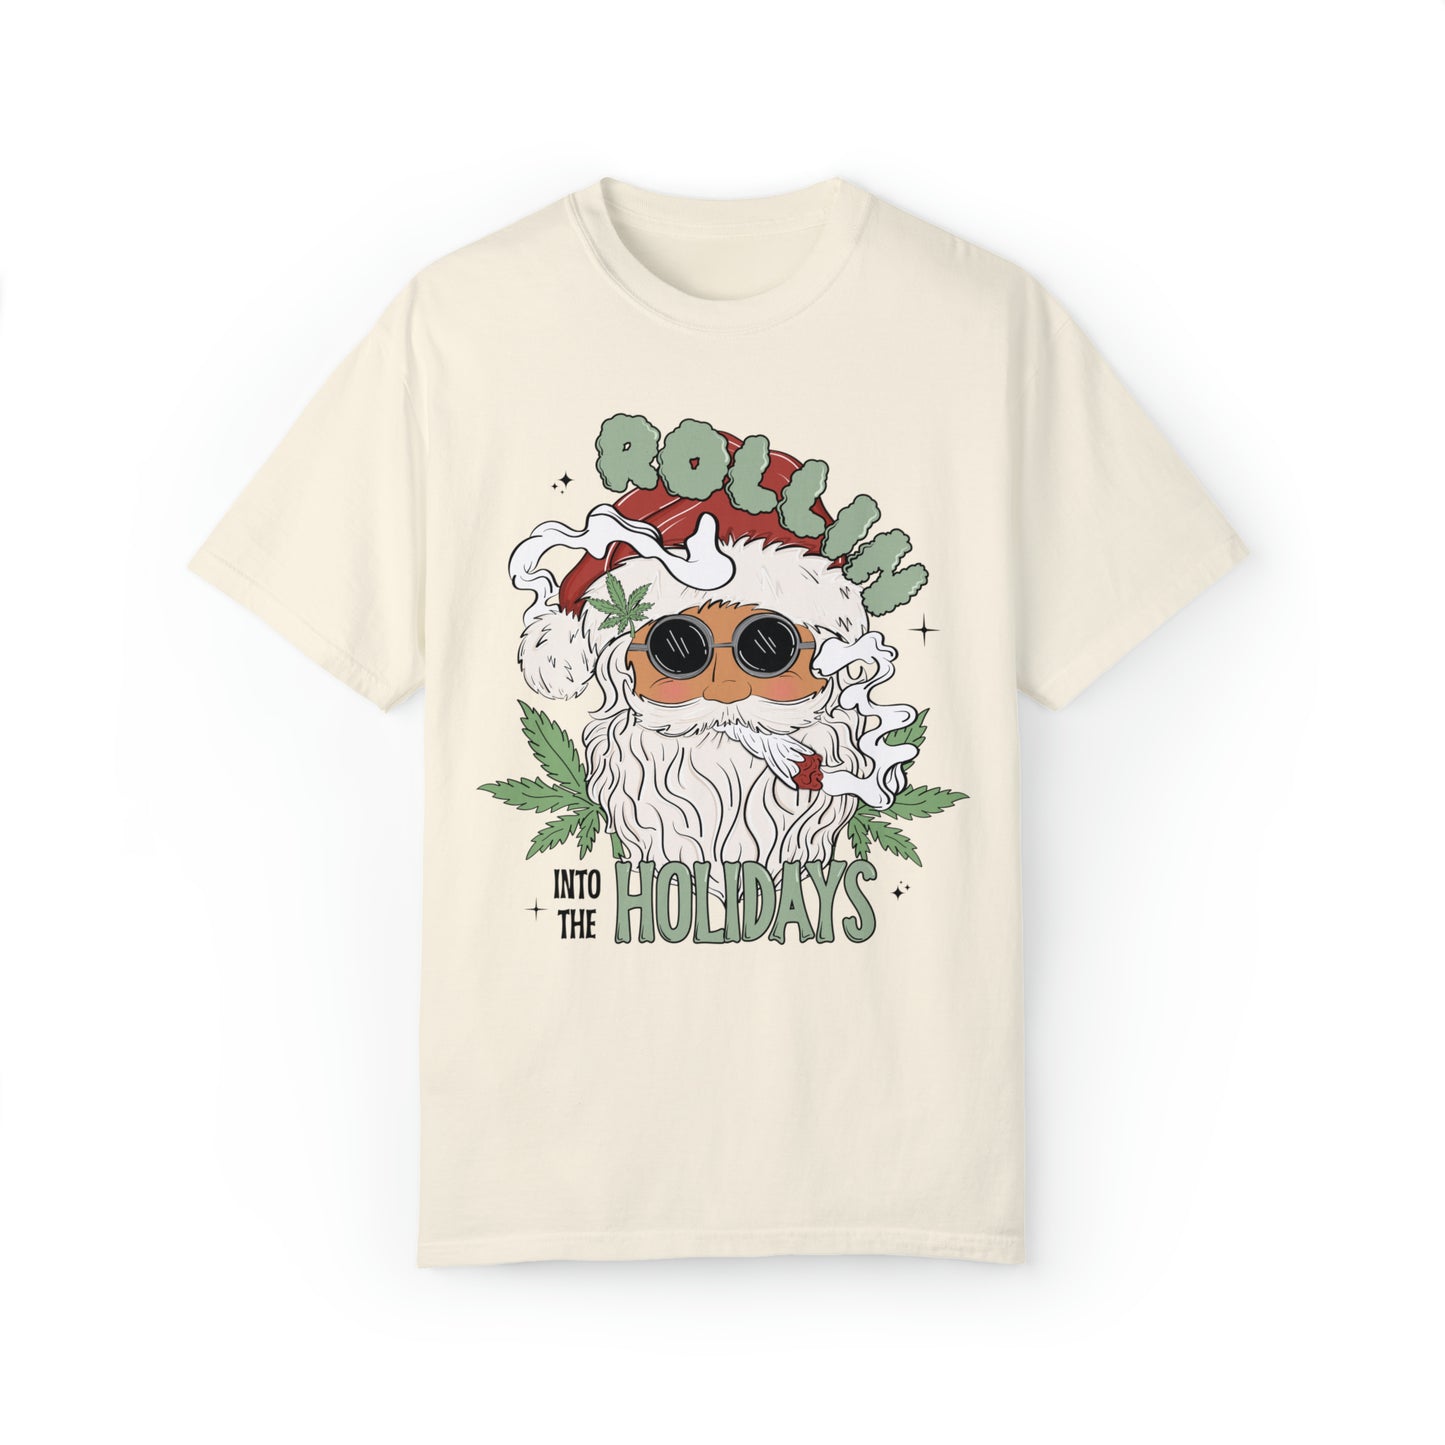 Rollin into the Holidays Shirt